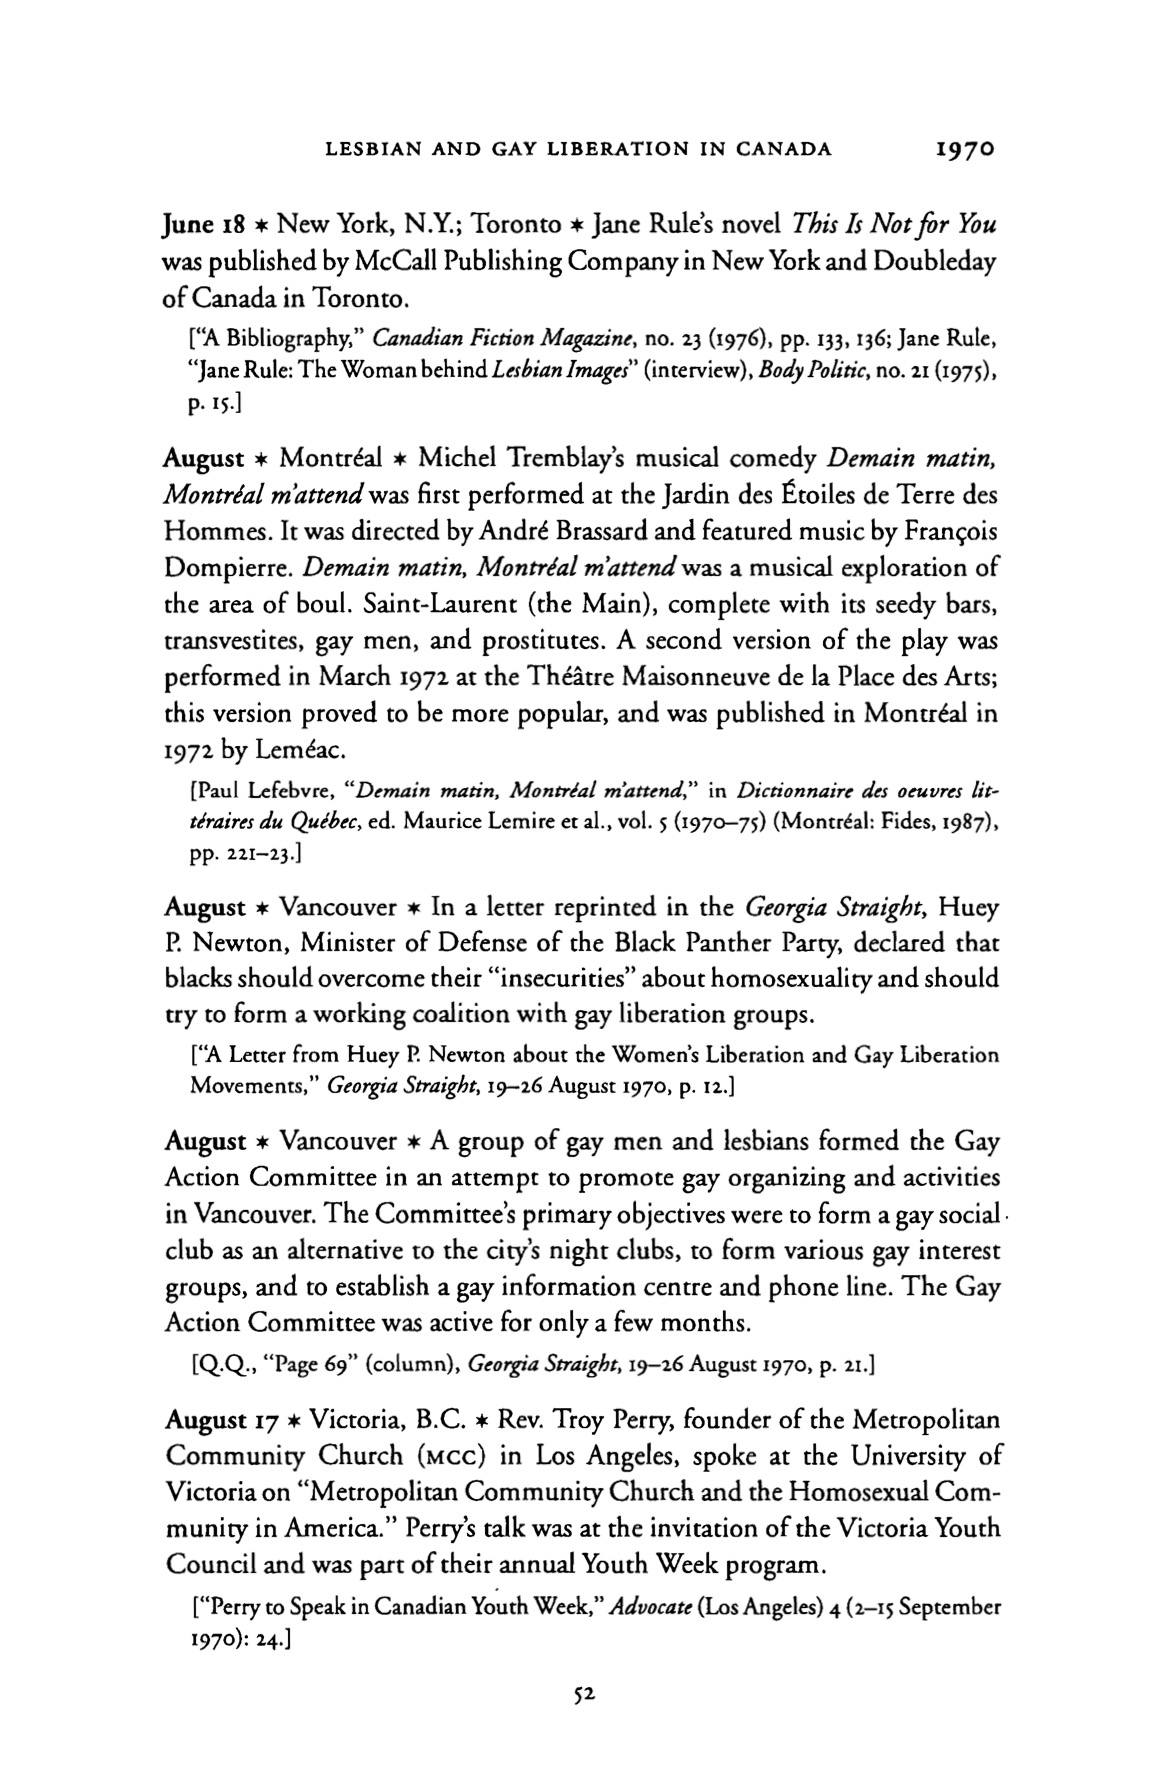 Lesbian and gay liberation in Canada: A selected annotated
    chronology page and TEI-encoded event records (Source: LGLC
    project).